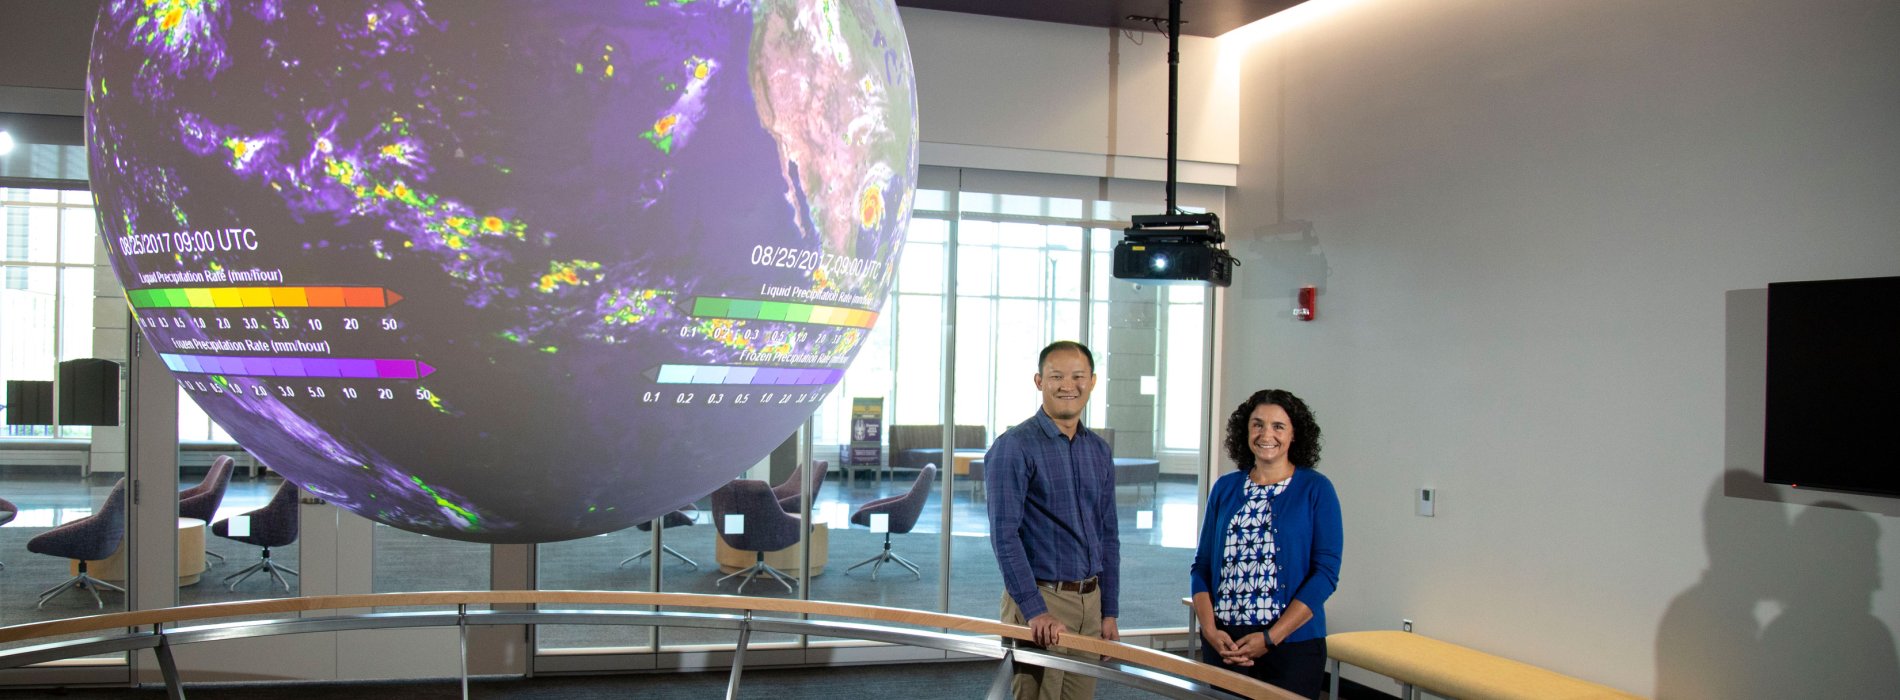 A man and a woman stand and smile for a camera in front of a huge digital globe showing live weather patterns.